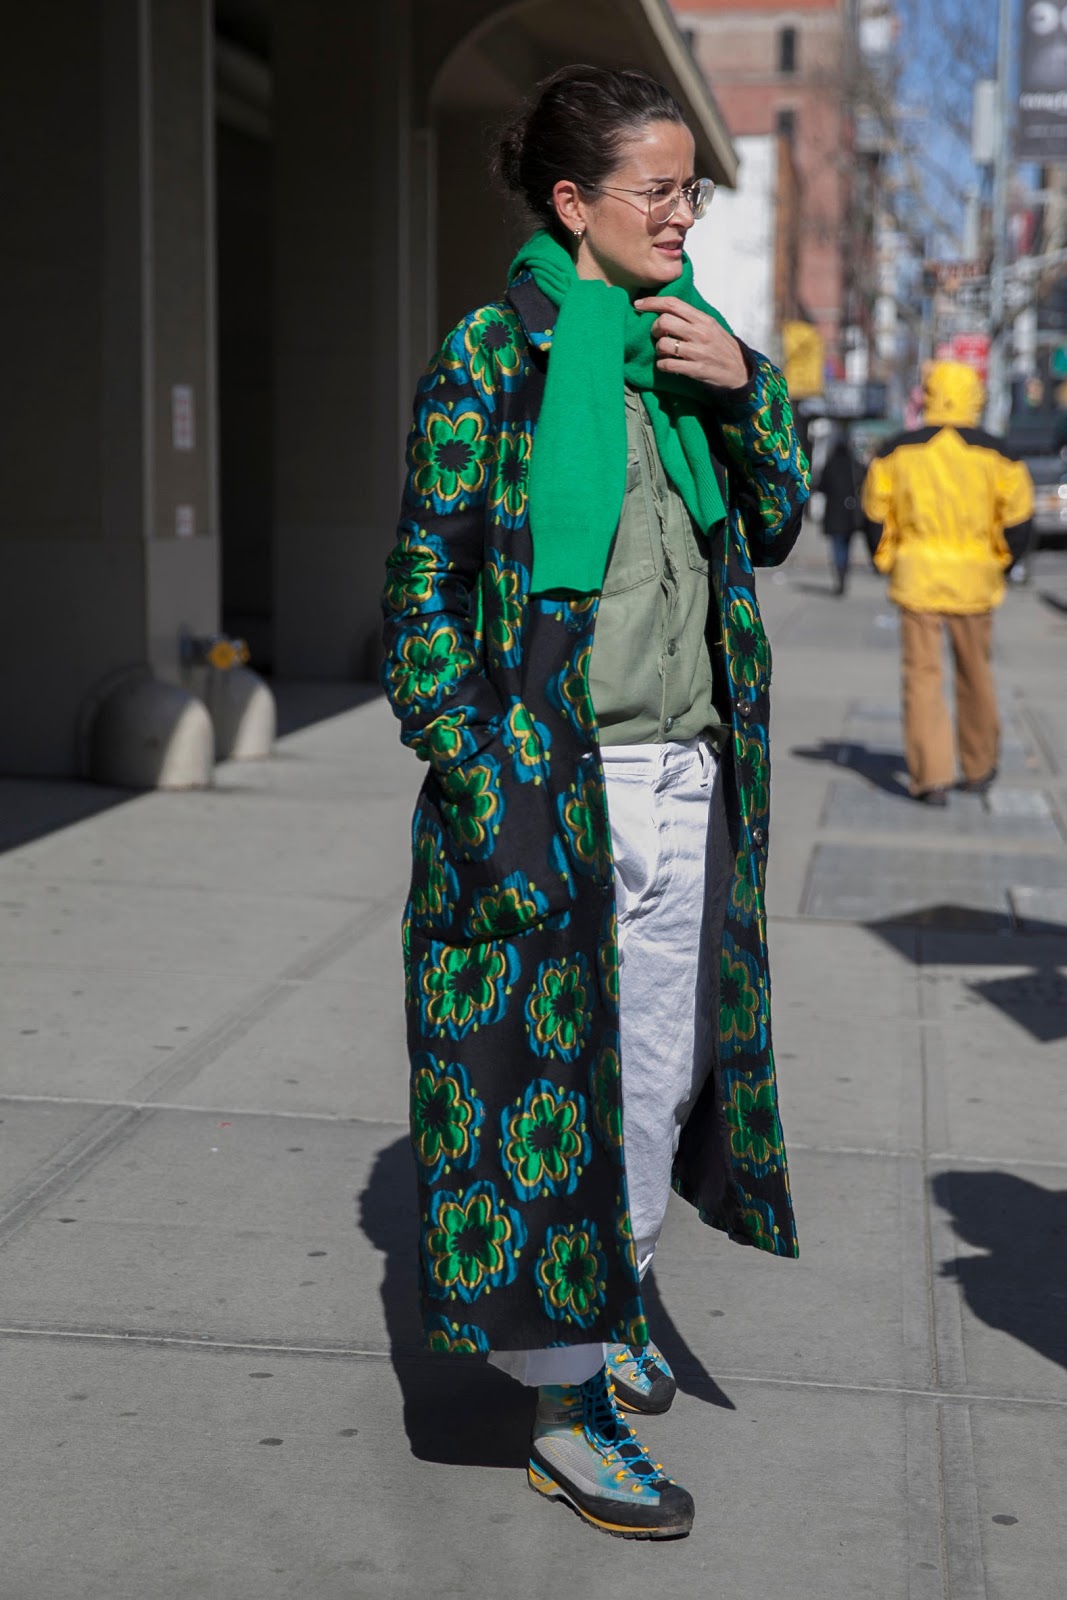 Europe Fashion Men's And Women Wears......: ON DAY 3 OF FASHION WEEK ...